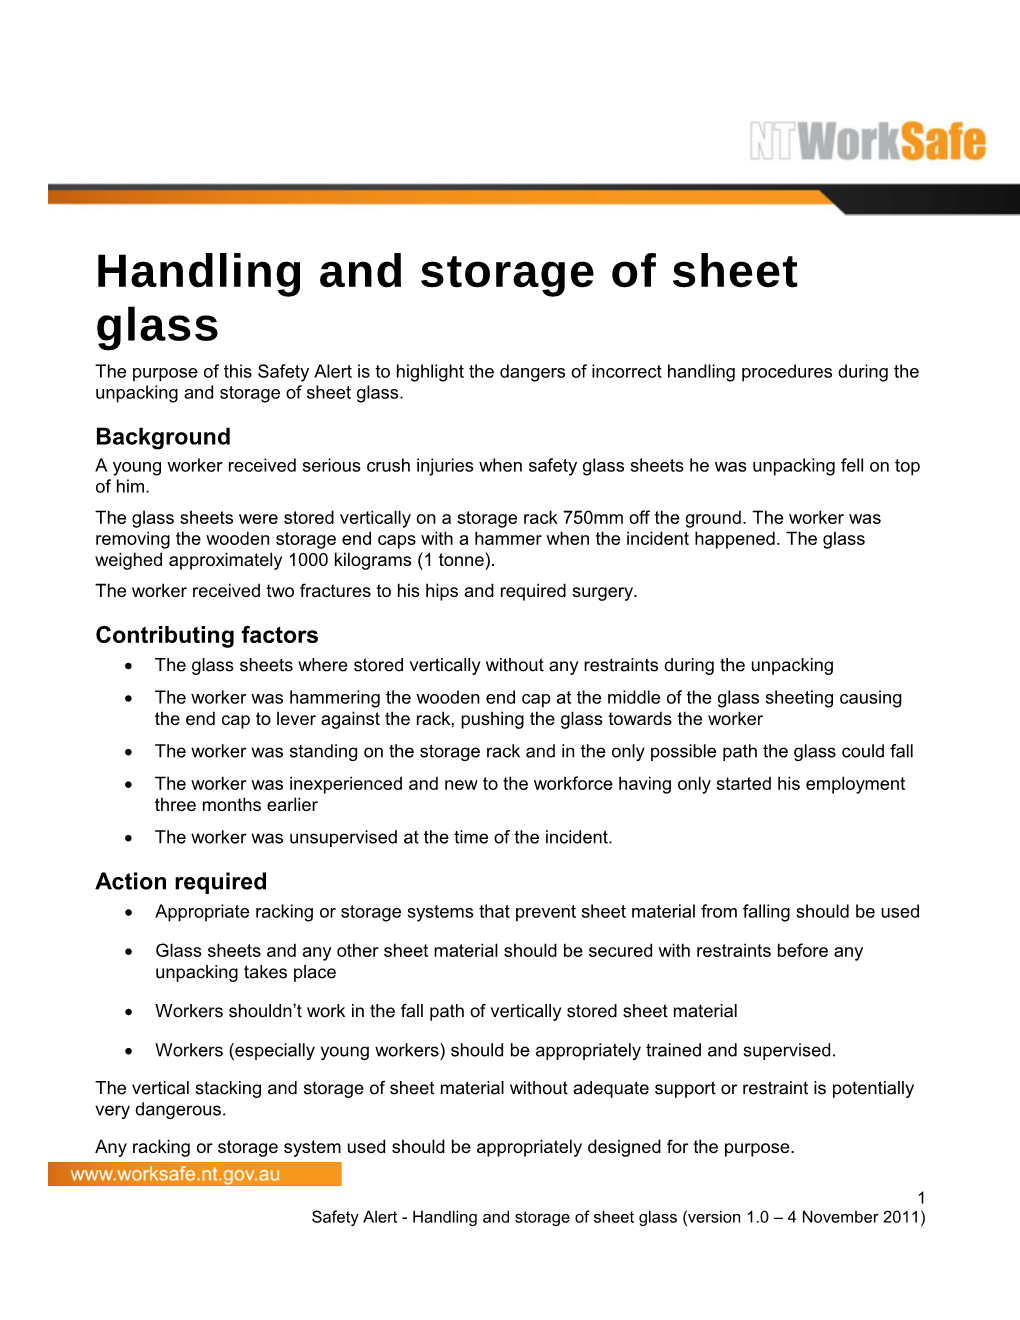 Safety Alert - Handling and Storage of Sheet Glass